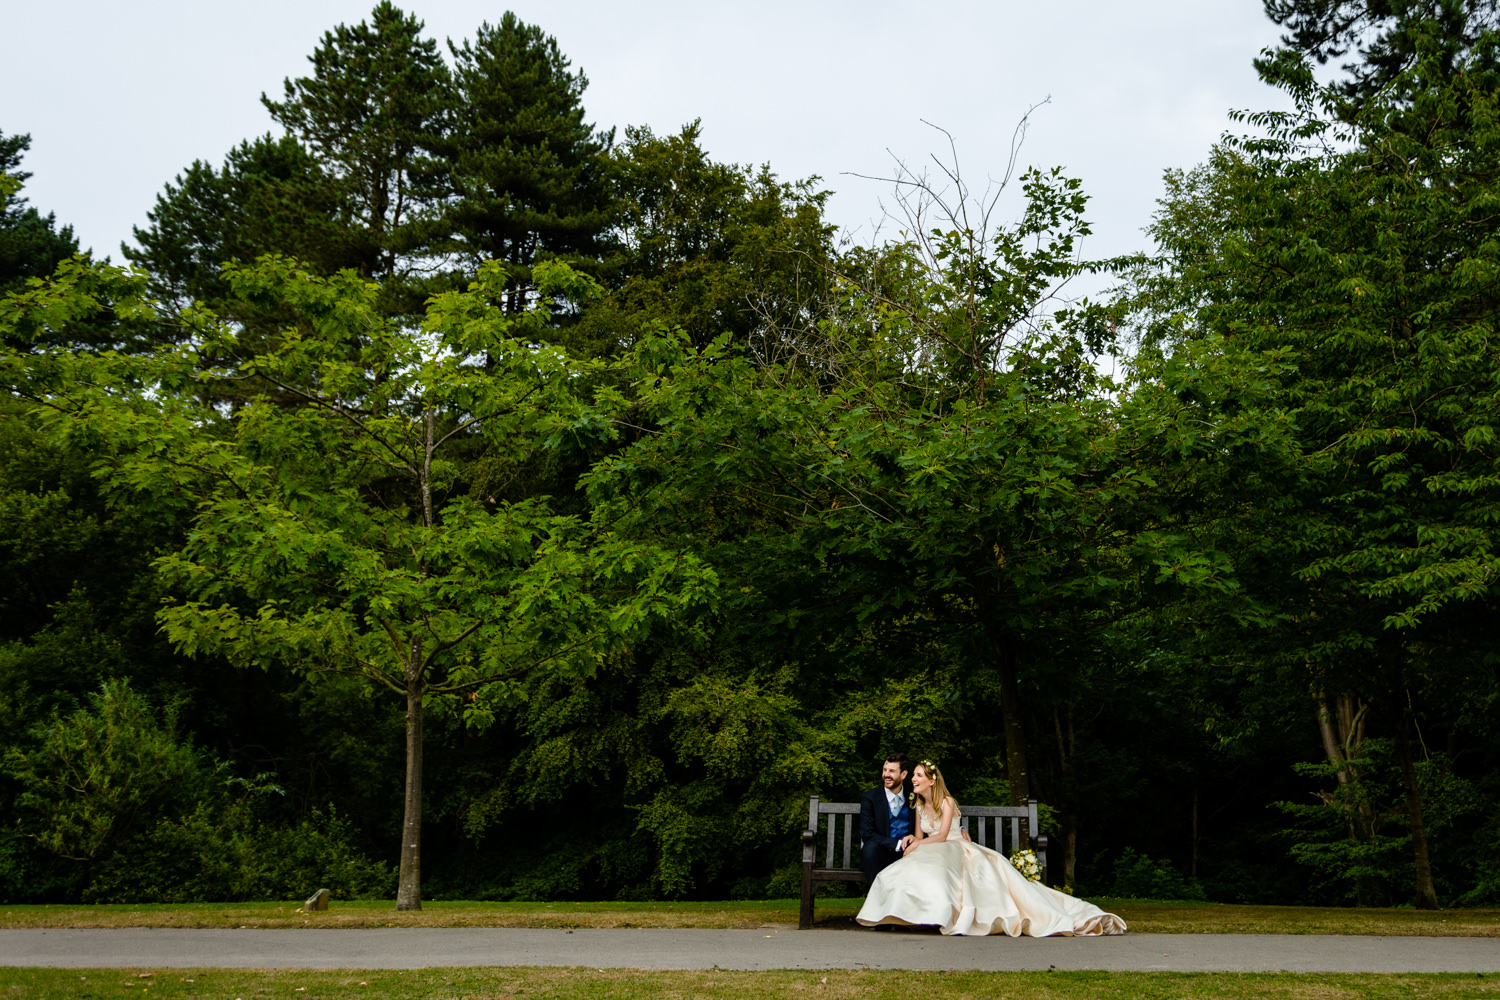 Bride and groom relaxing on a bench, wedding	photos	Whirlowbrook Hall 